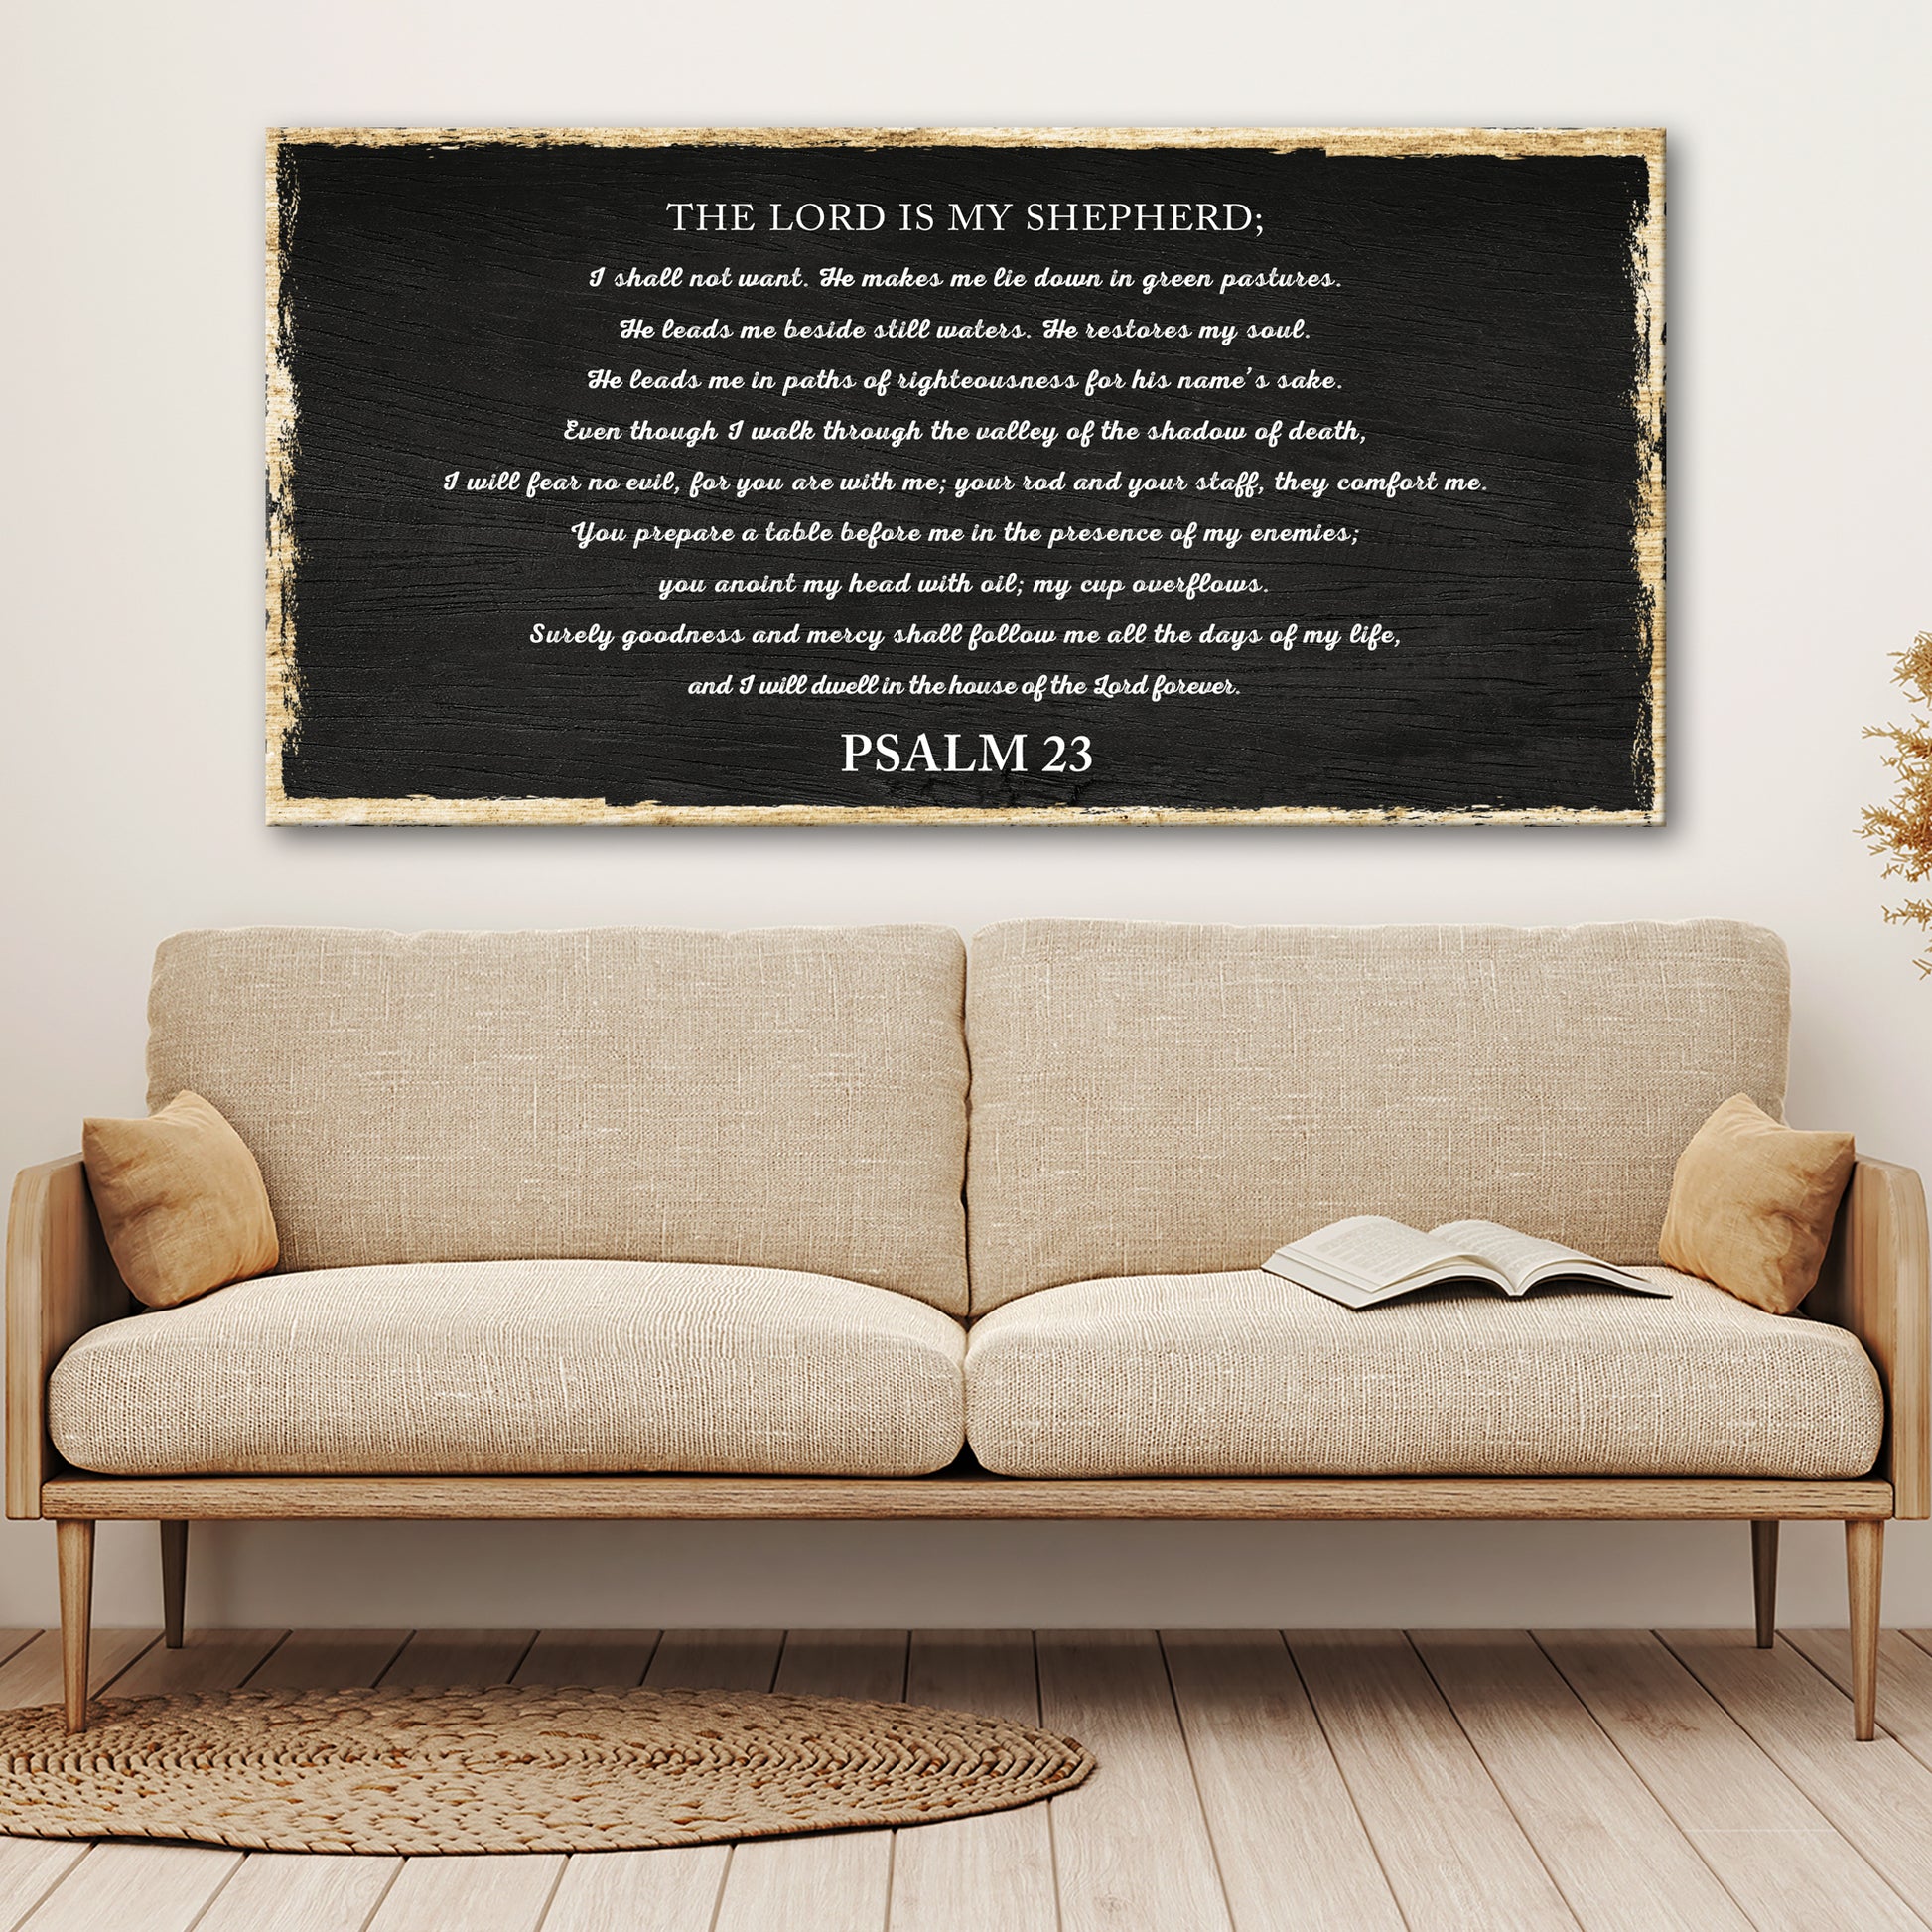 Psalm 23 - The Lord Is My Shepherd Sign Style 2 - Image by Tailored Canvases